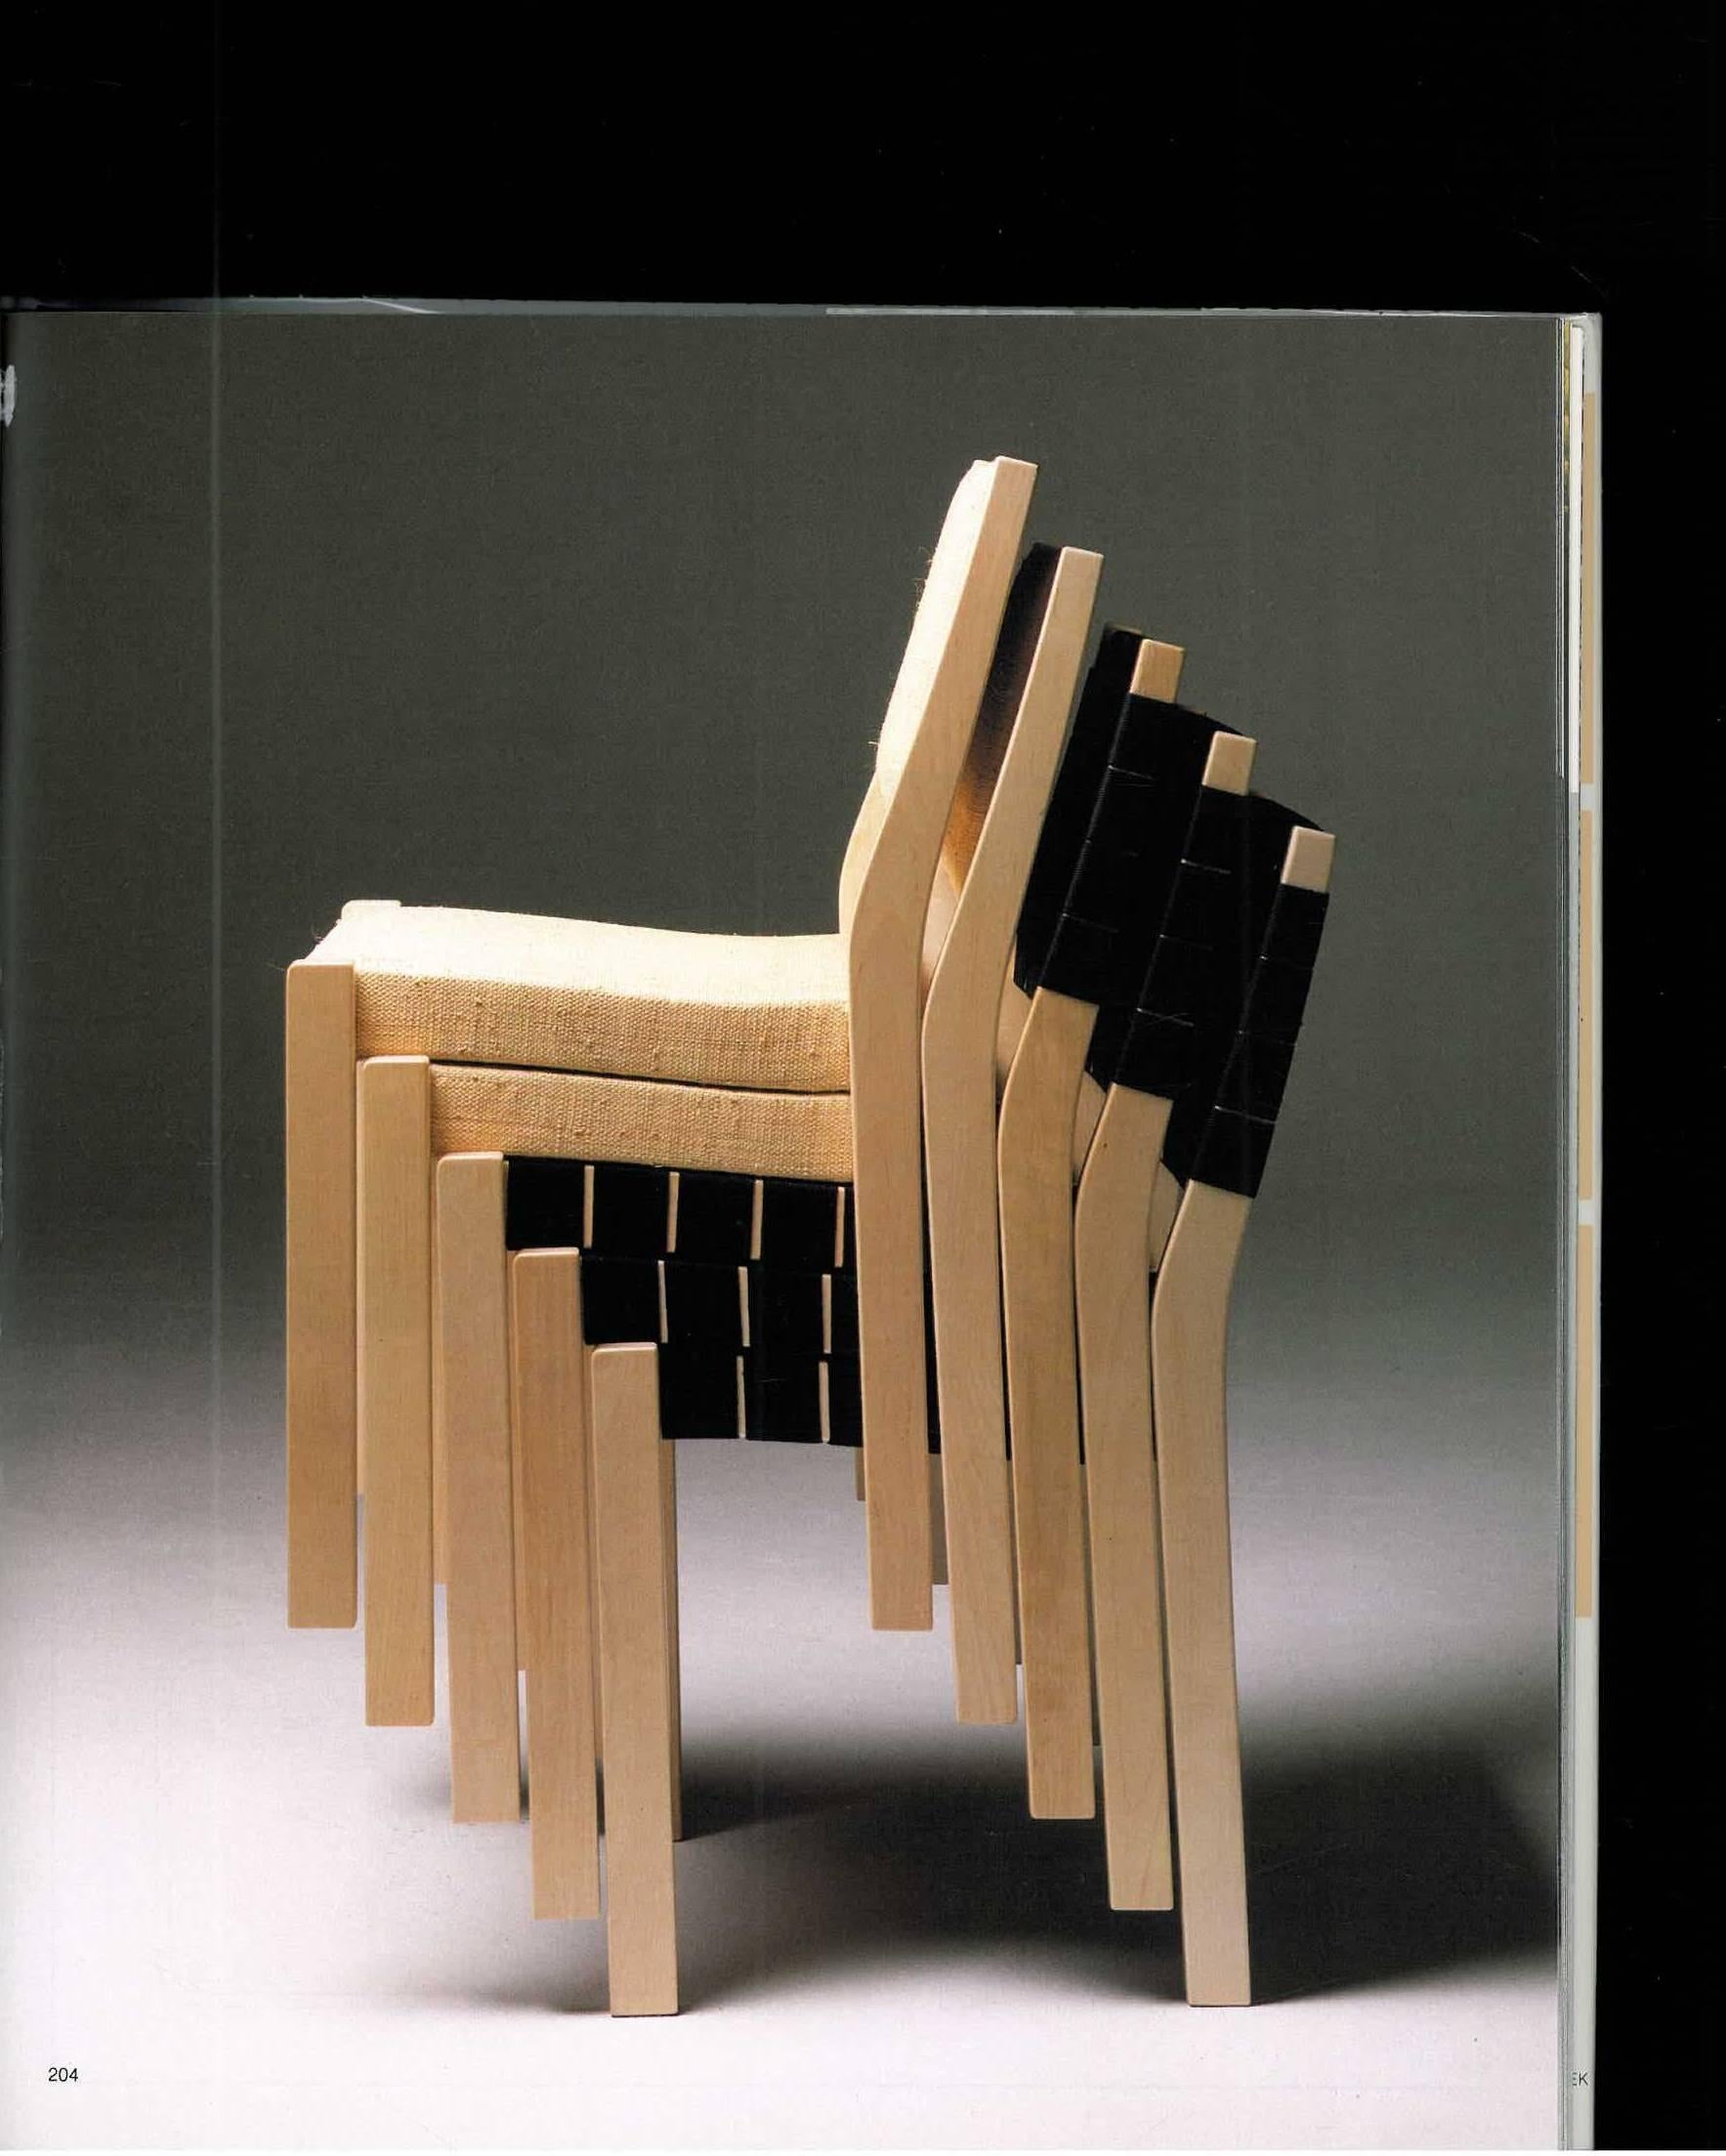 Alvar Aalto Furniture (Book) In Good Condition For Sale In North Yorkshire, GB